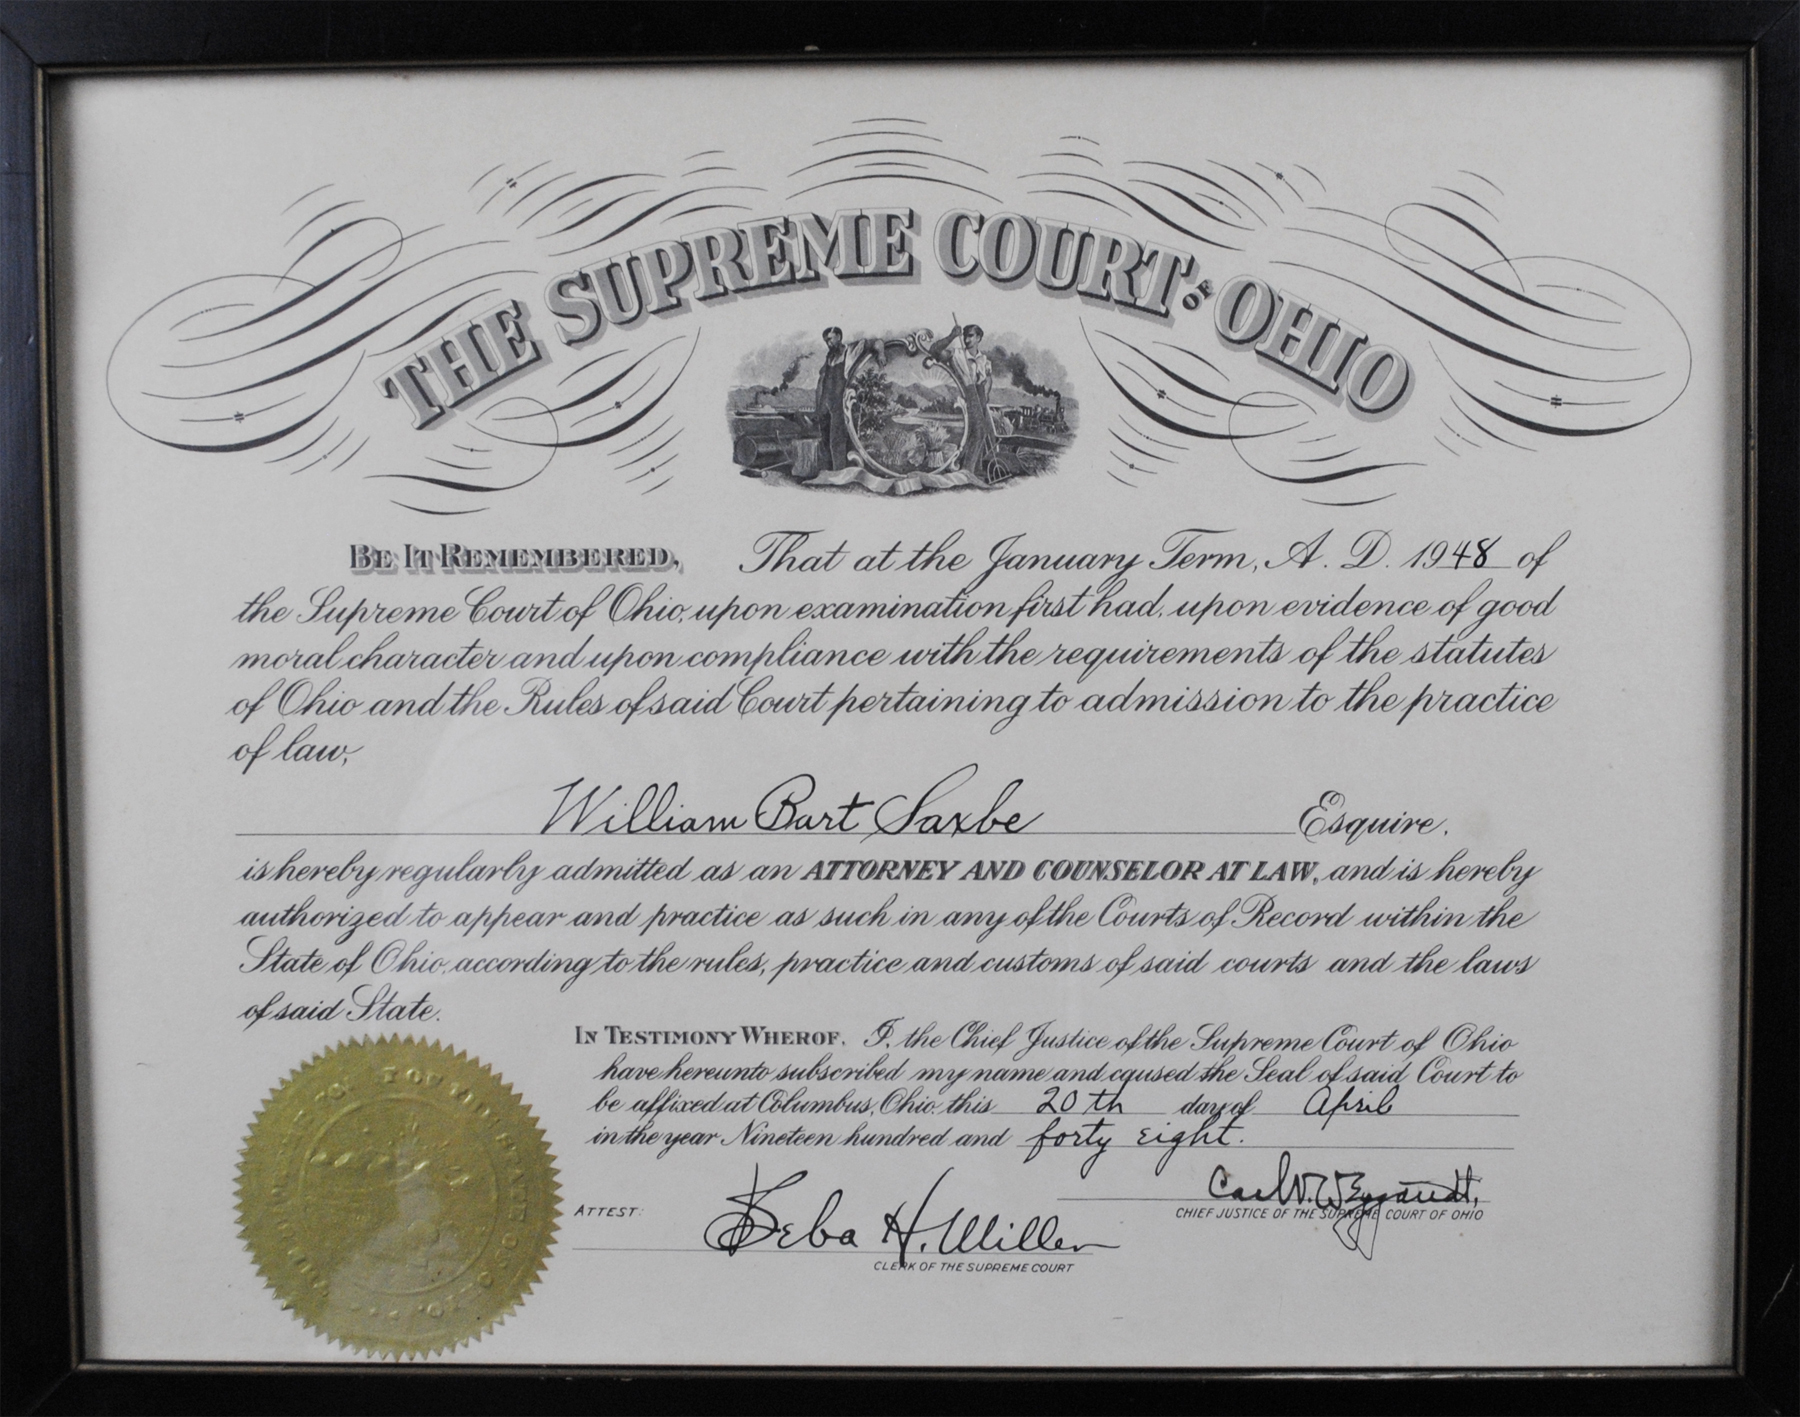 William B. Saxbe’s Certificate of Bar Admission  